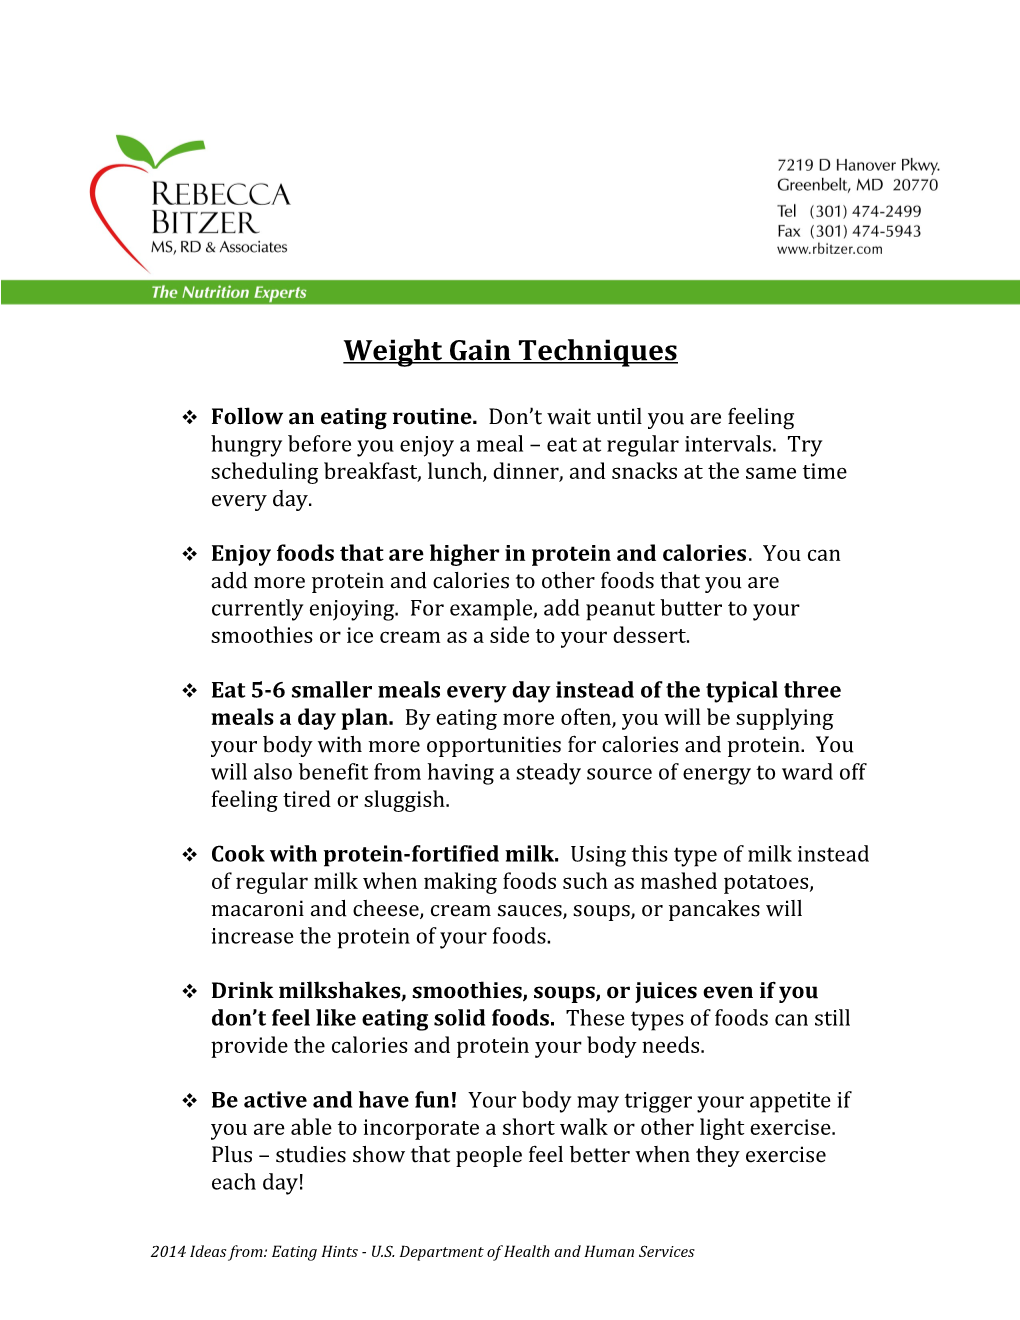 Weight Gain Techniques